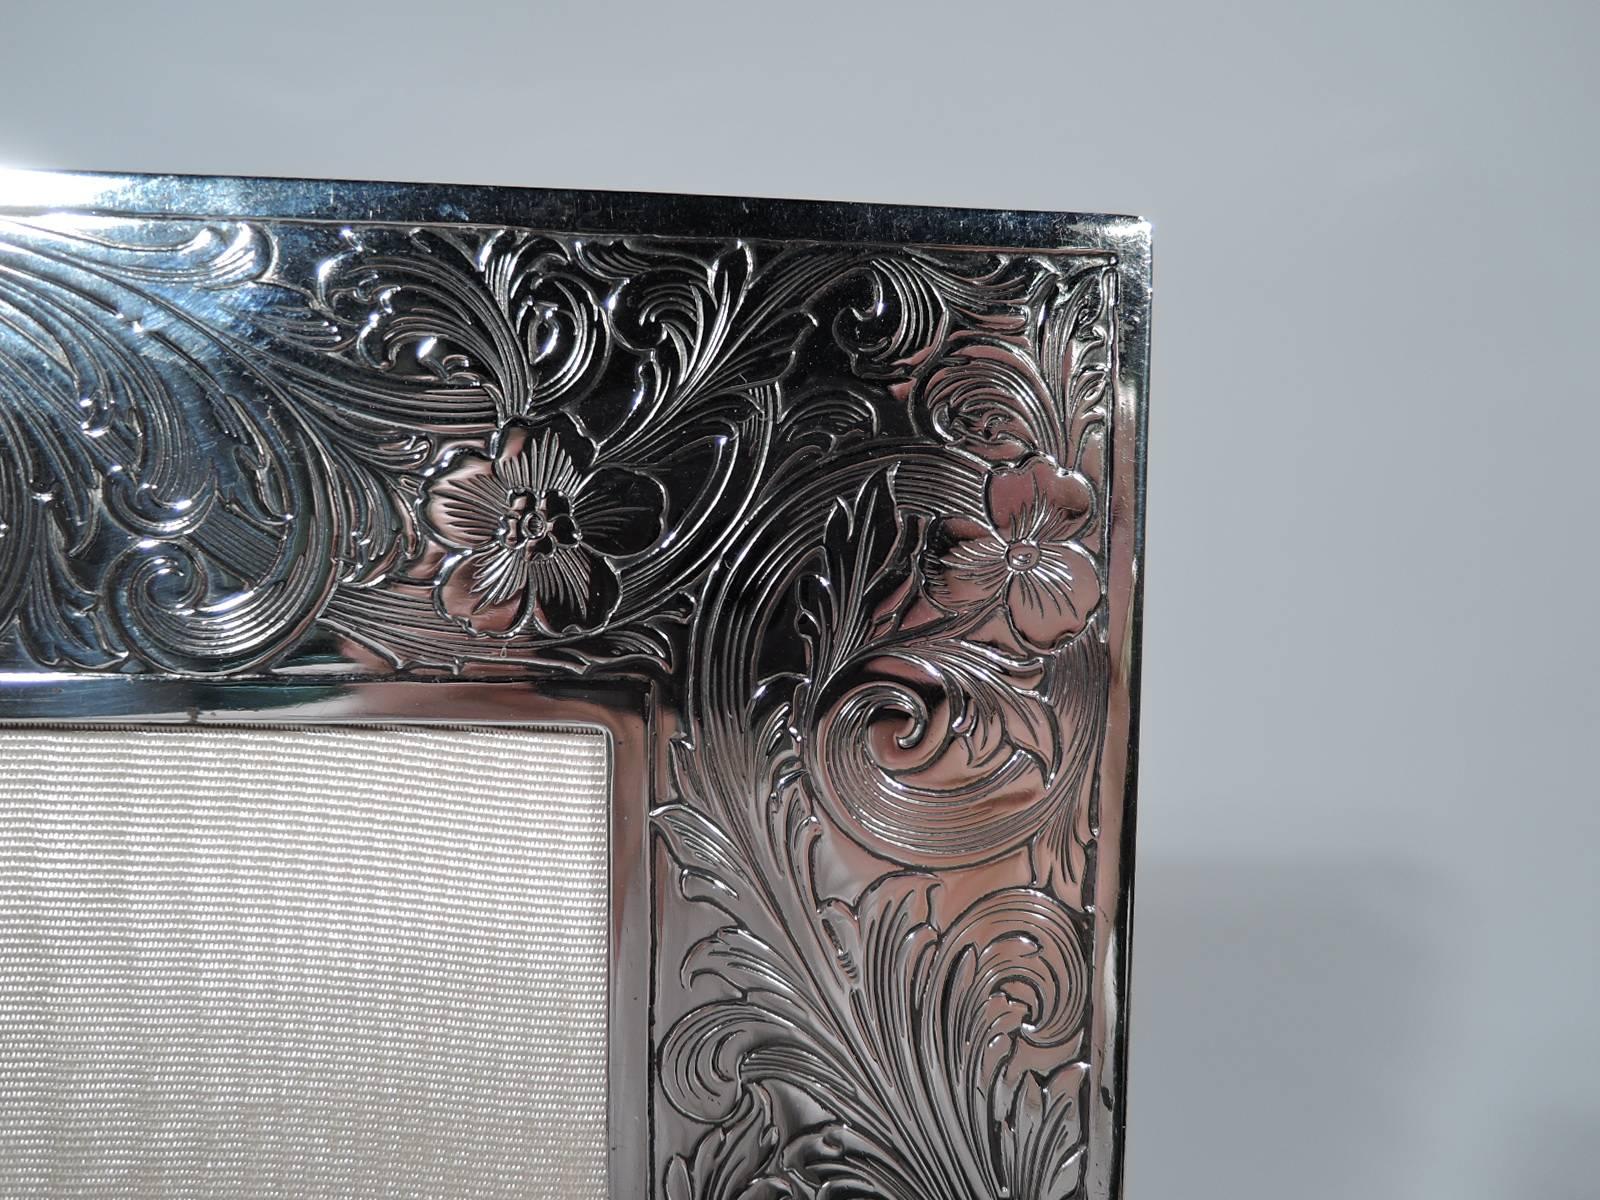 Edwardian sterling silver frame. Made by Gorham in Providence in 1914. Rectangular window and wide flat border engraved with dense and dynamic flowers and scrolls. Scrolled cartouche (vacant). With glass, silk lining, and velvet back and hinged